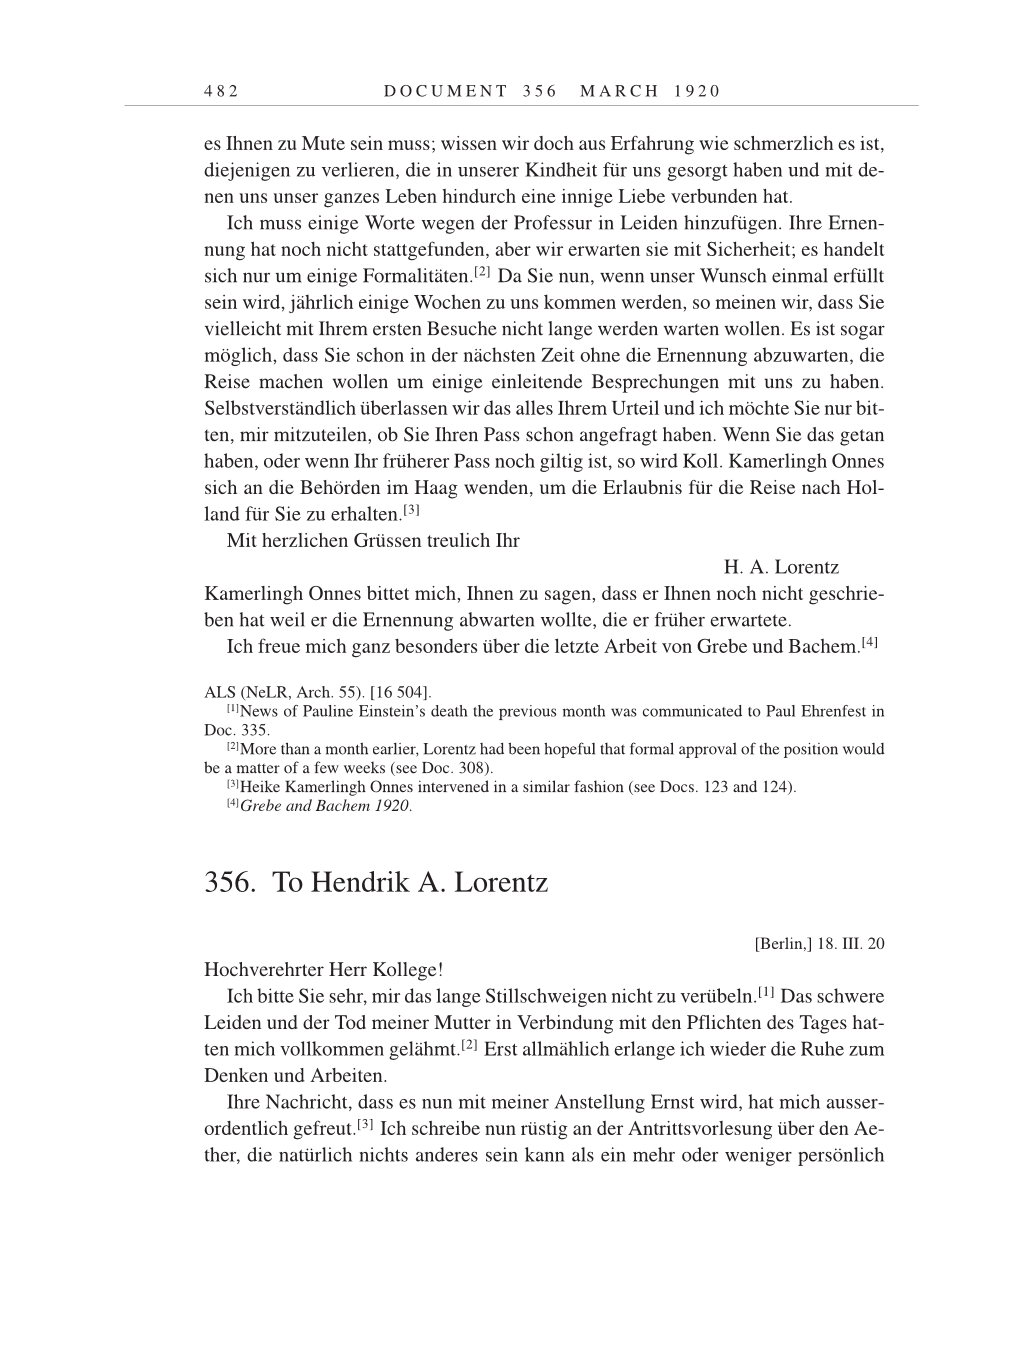 Volume 9: The Berlin Years: Correspondence January 1919-April 1920 page 482